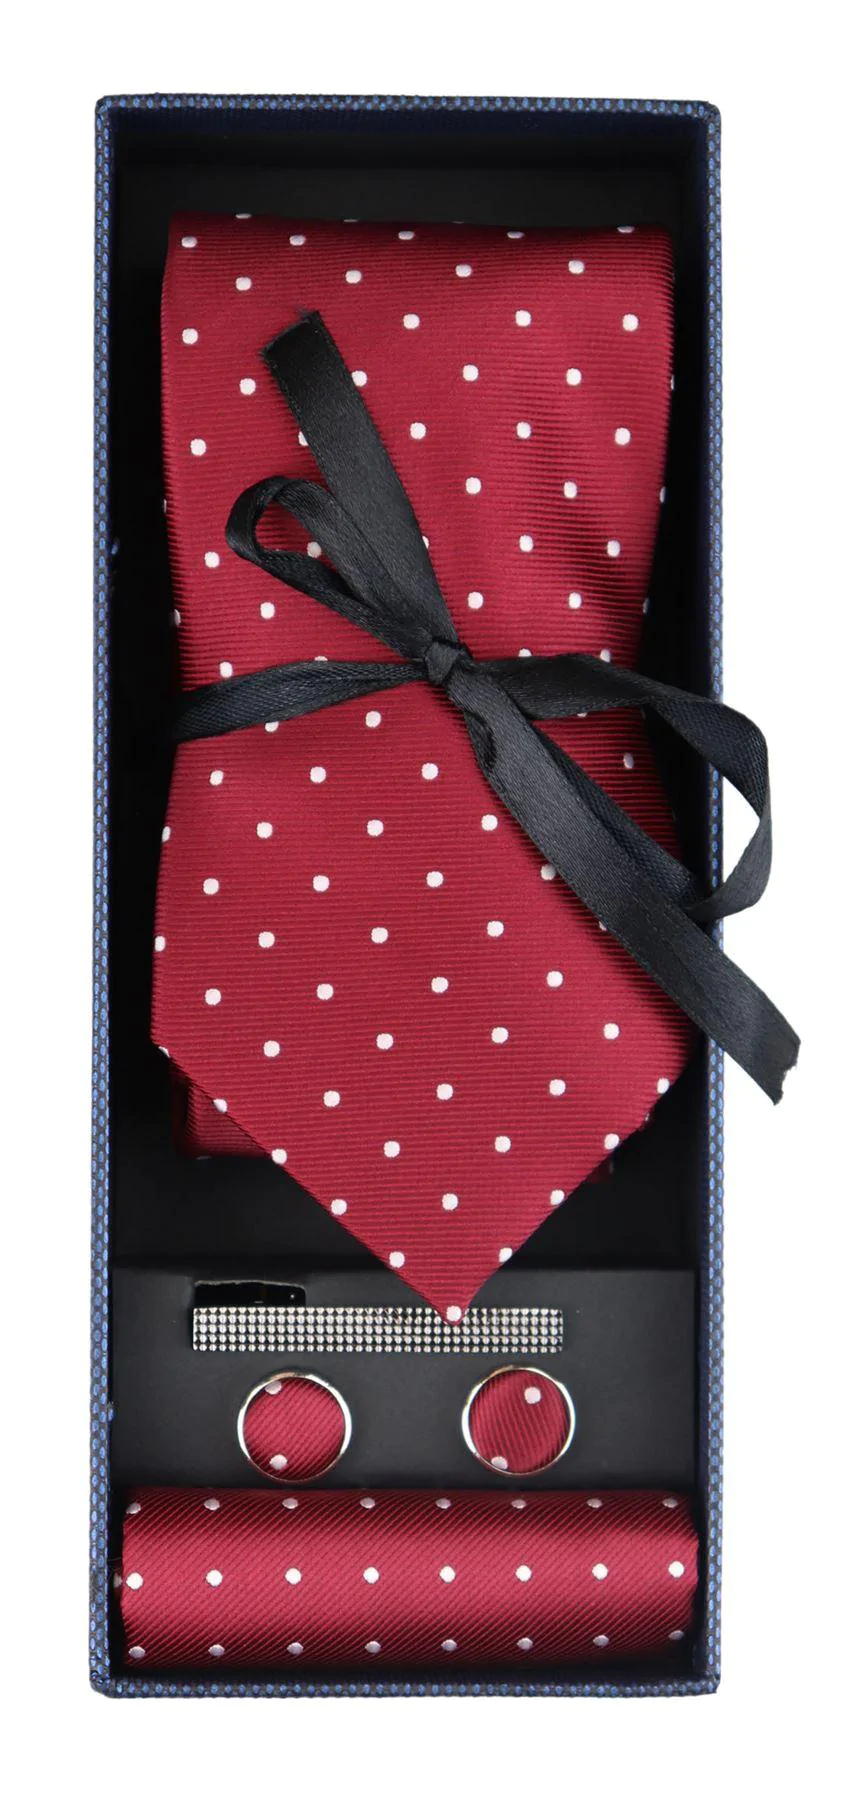 Dotted Wine Neck Tie Gift Set Pocket Square Cuff Links Tie Pin Polka Dot Satin